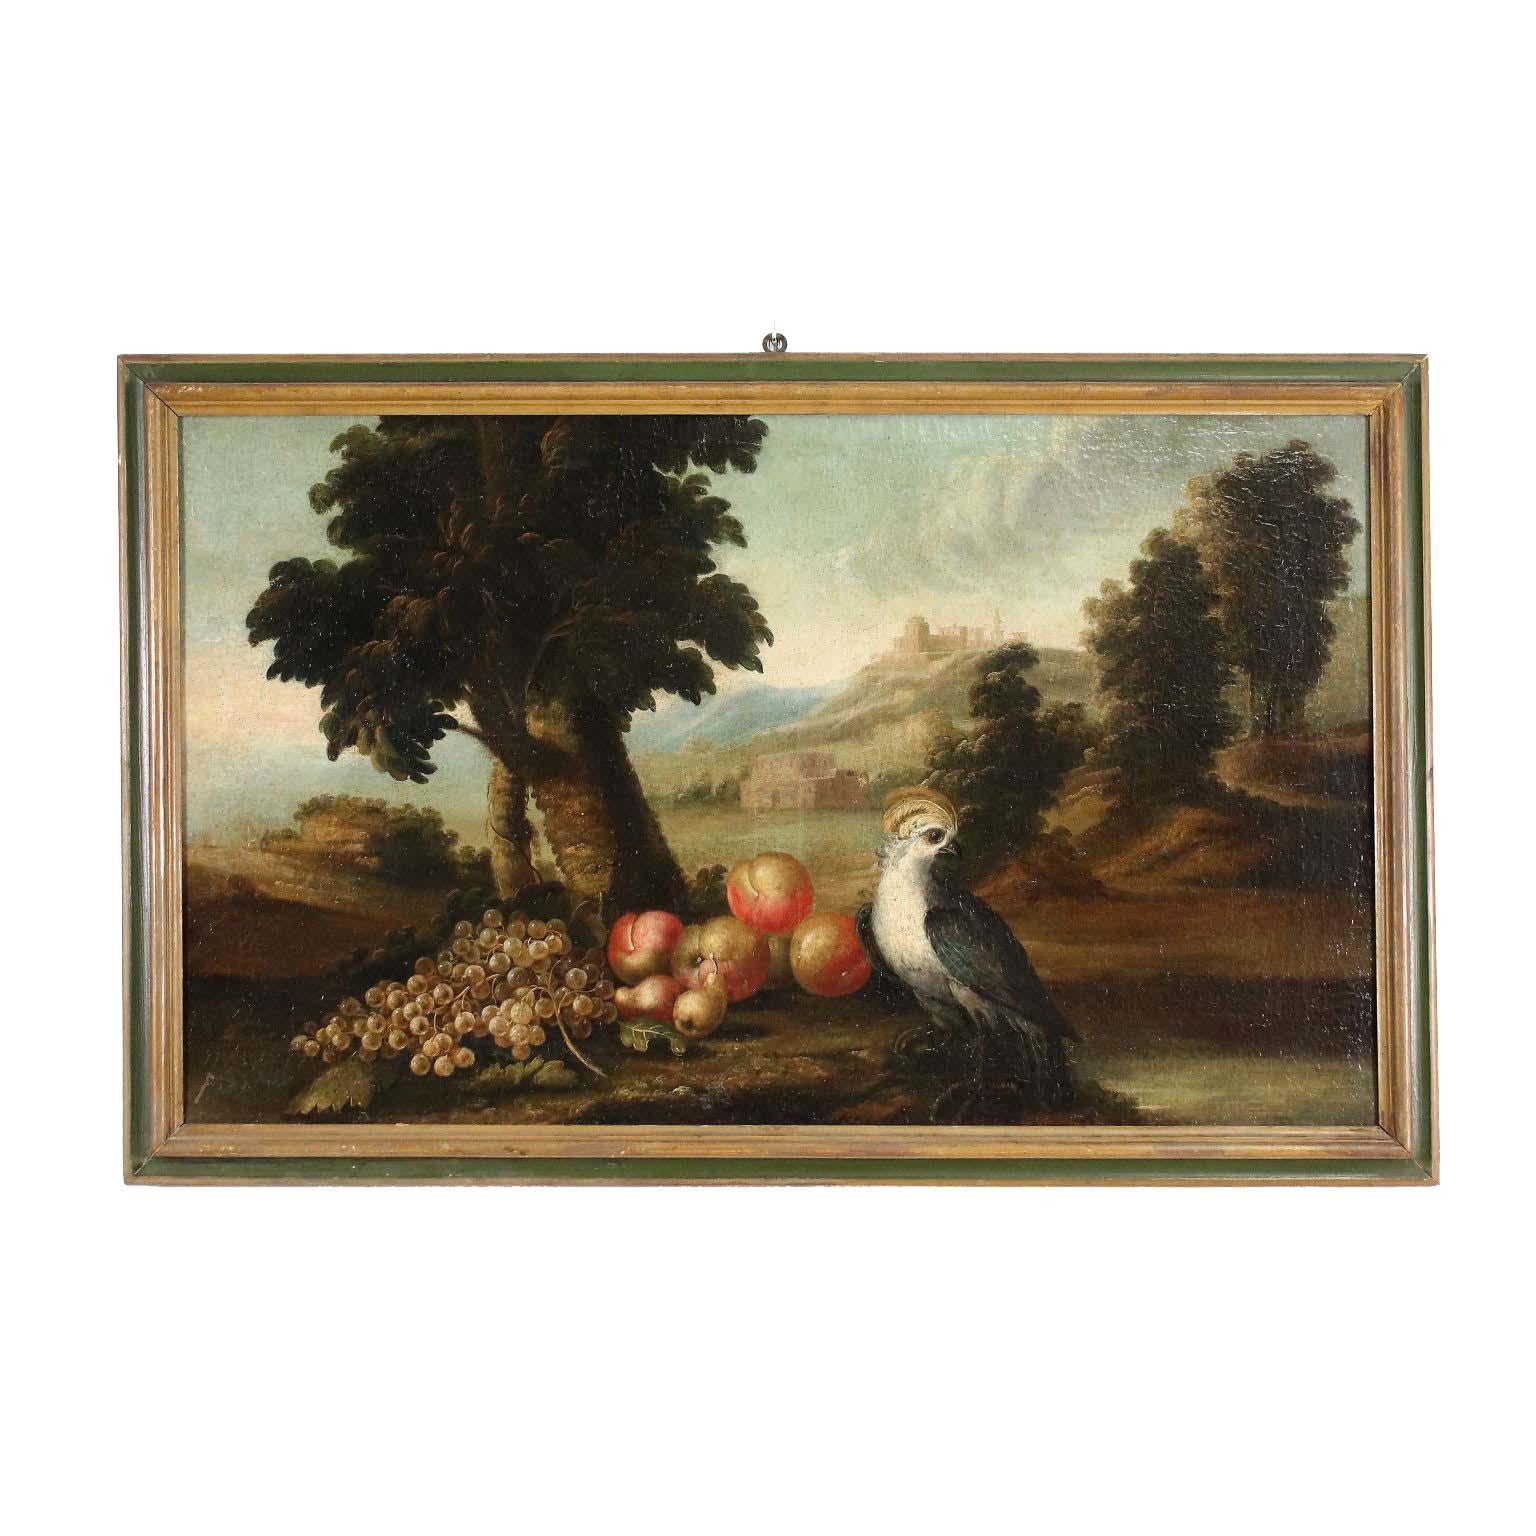 Unknown Landscape Painting - Landscape with fruit and bird composition, XVIIIth century